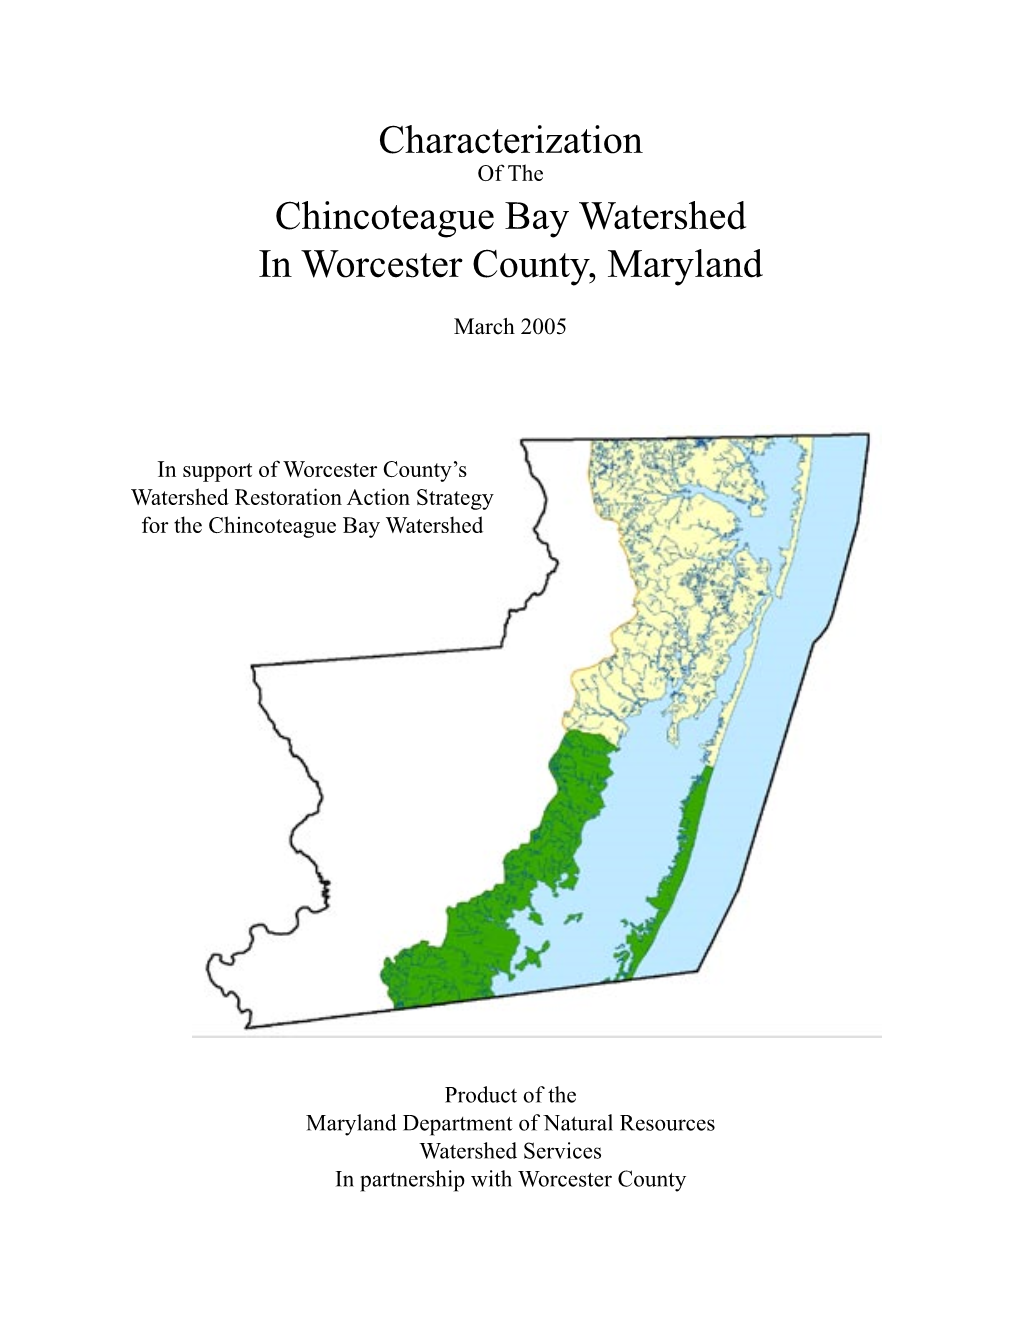 Characterization Chincoteague Bay Watershed in Worcester County